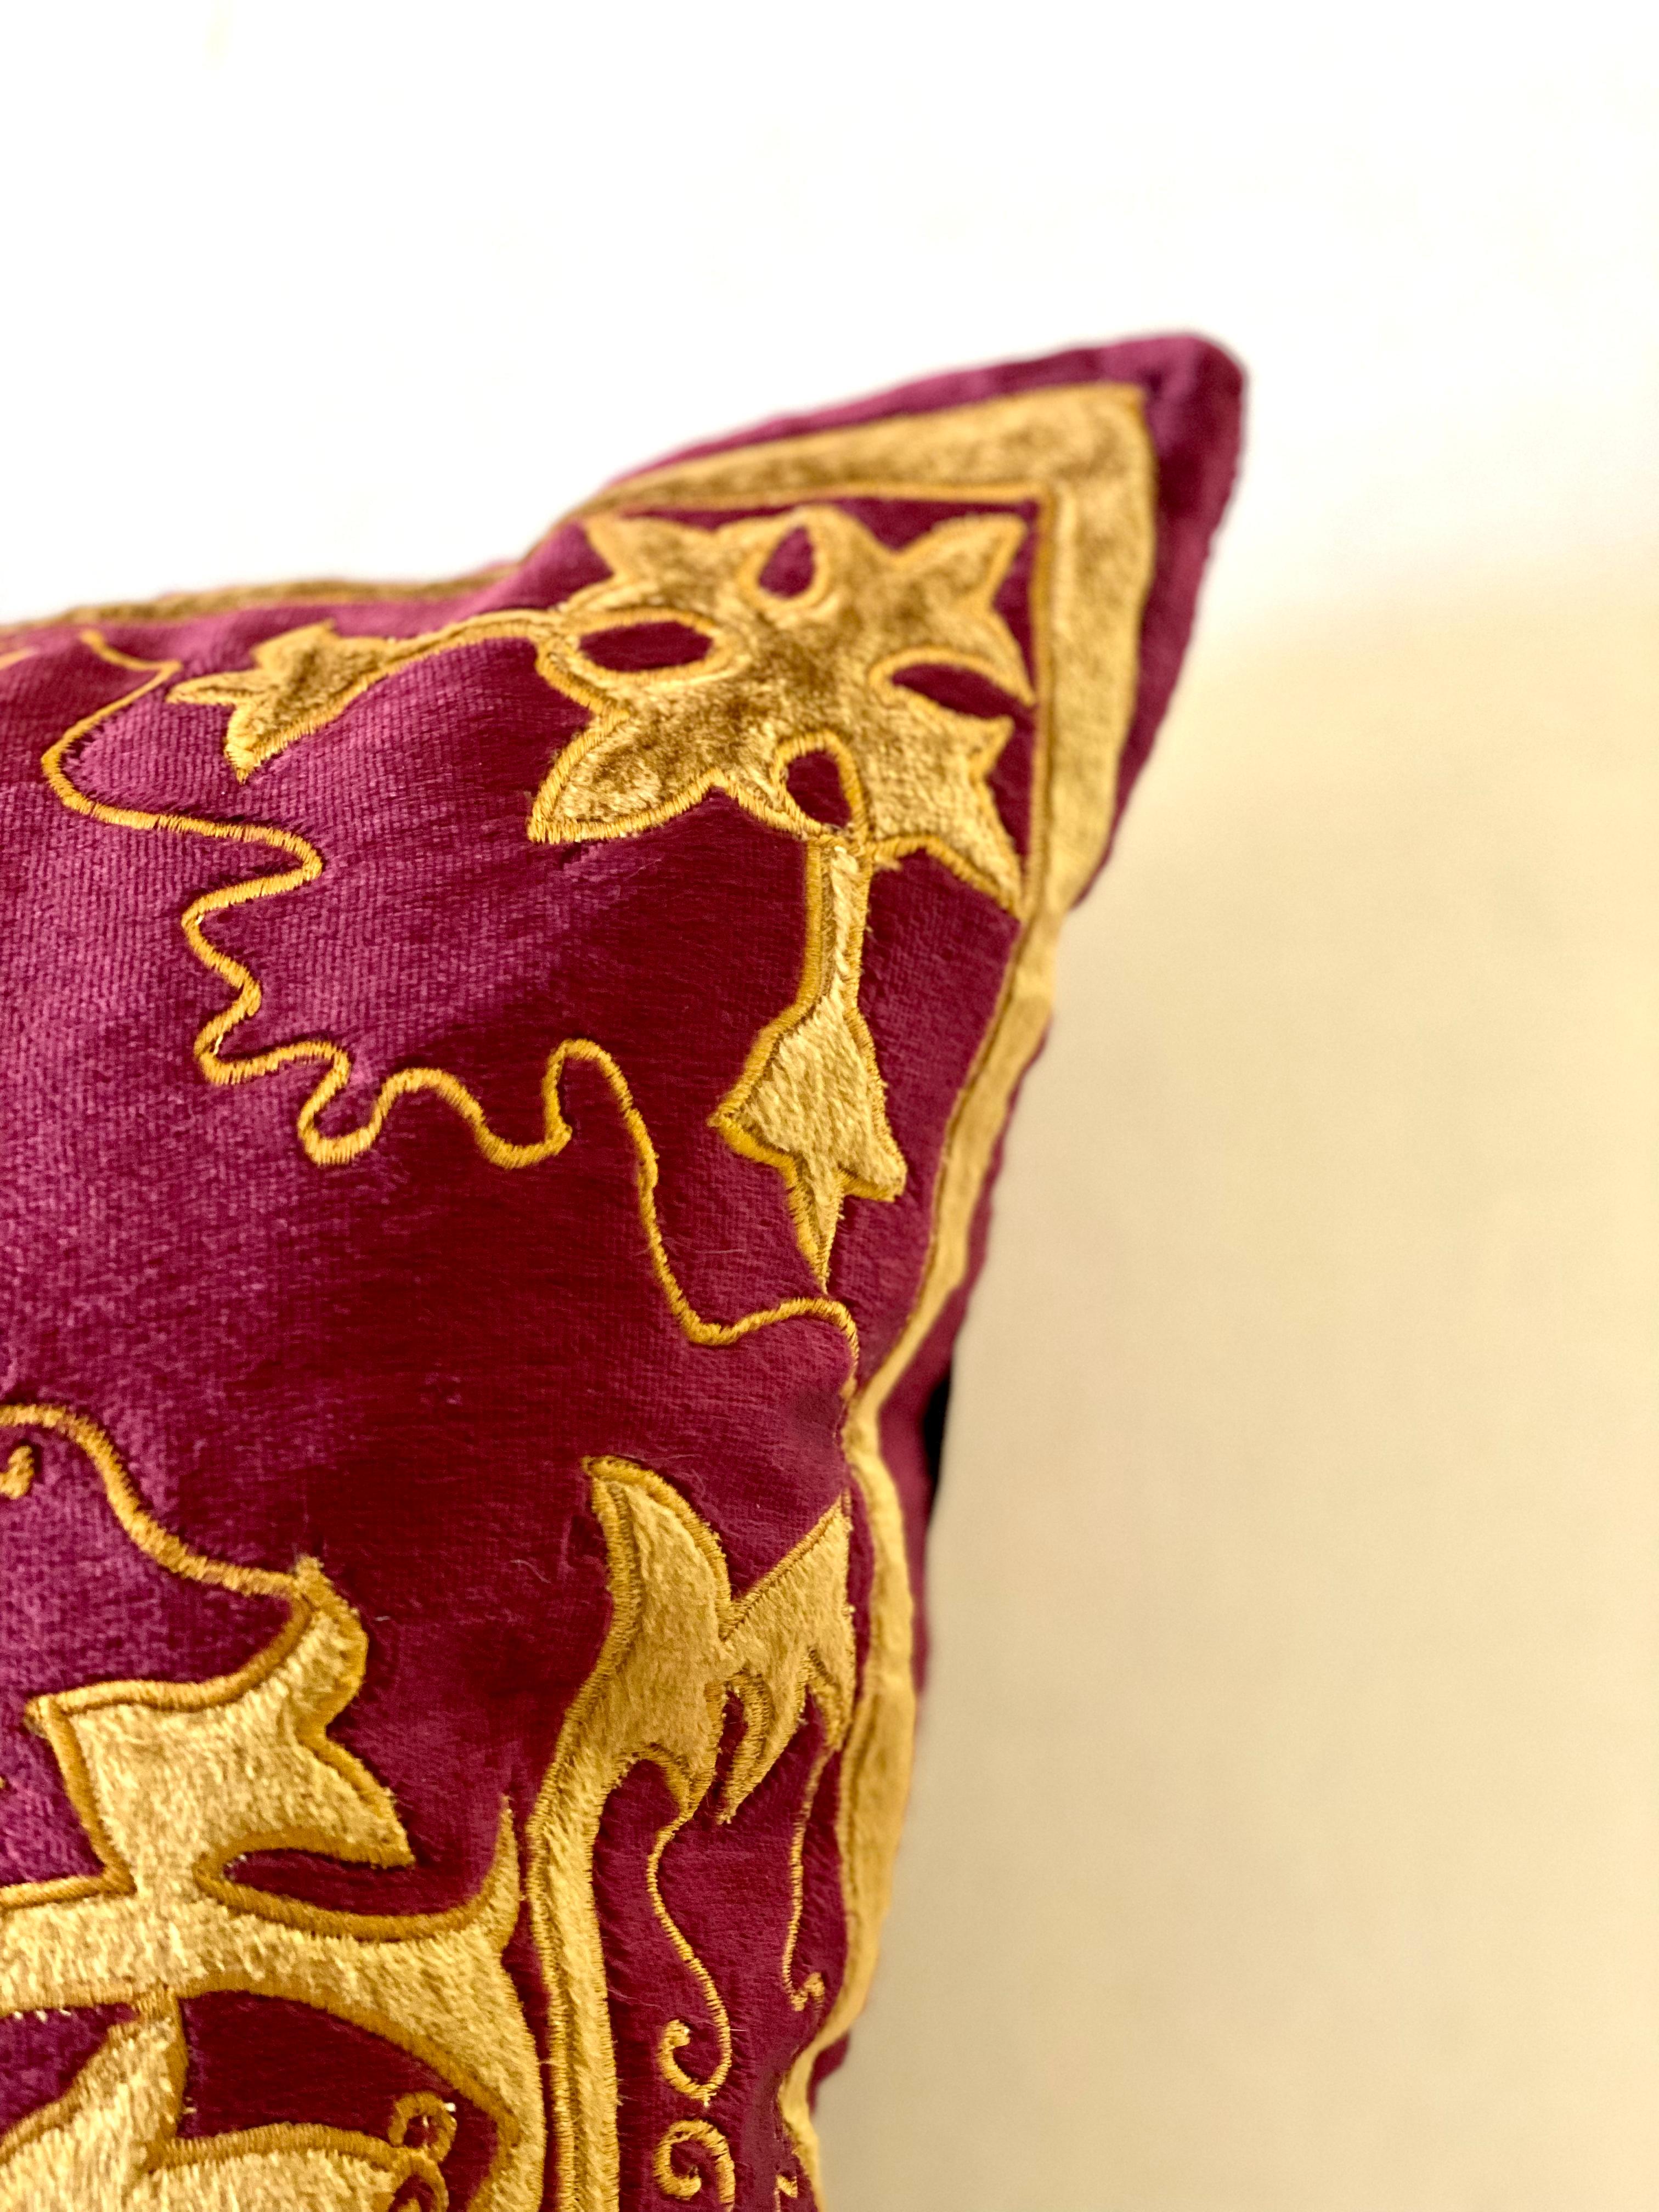 English Baroque Style, Red and Gold Velvet Pillow, Elaborate Applique Work